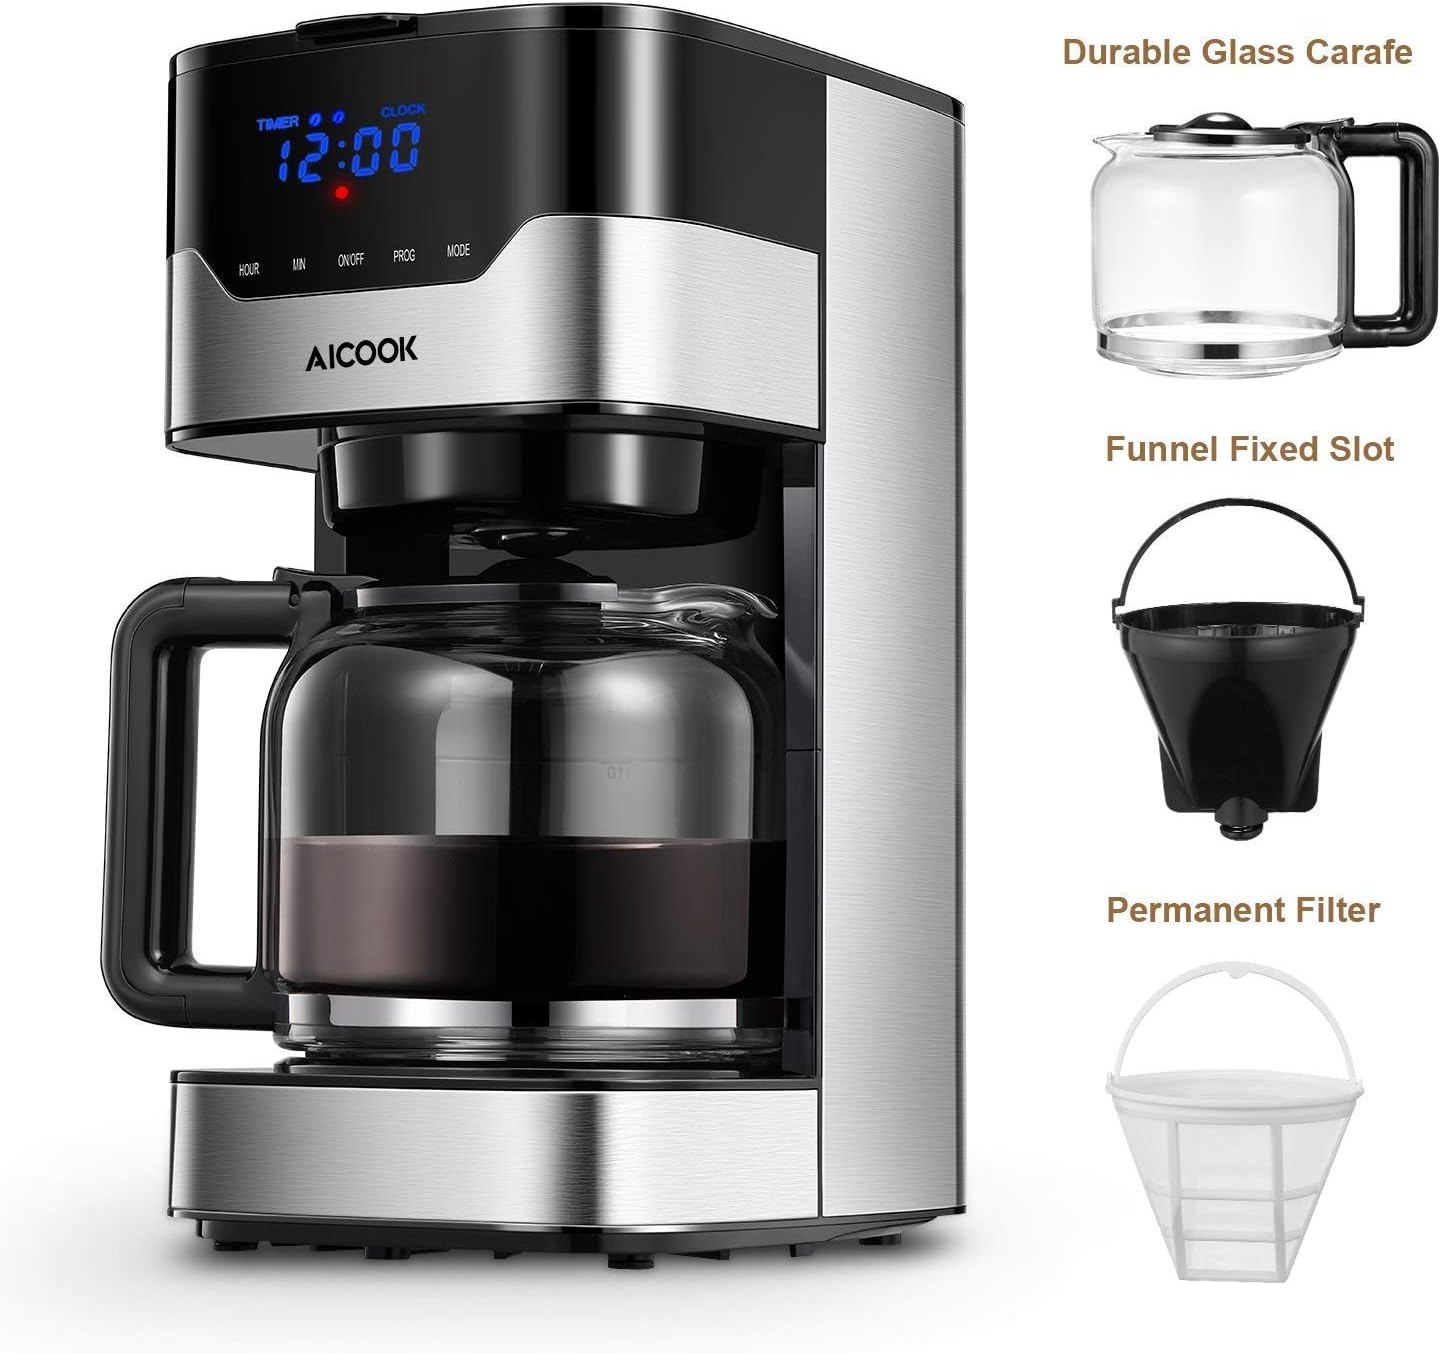 Coffee Maker, Filter Coffee Machine, Aicook 12 Cup Programmable Coffee Maker with Timer, Carafe, Anti-Drip System, Permanent Reusable Filter, Black and Silver.